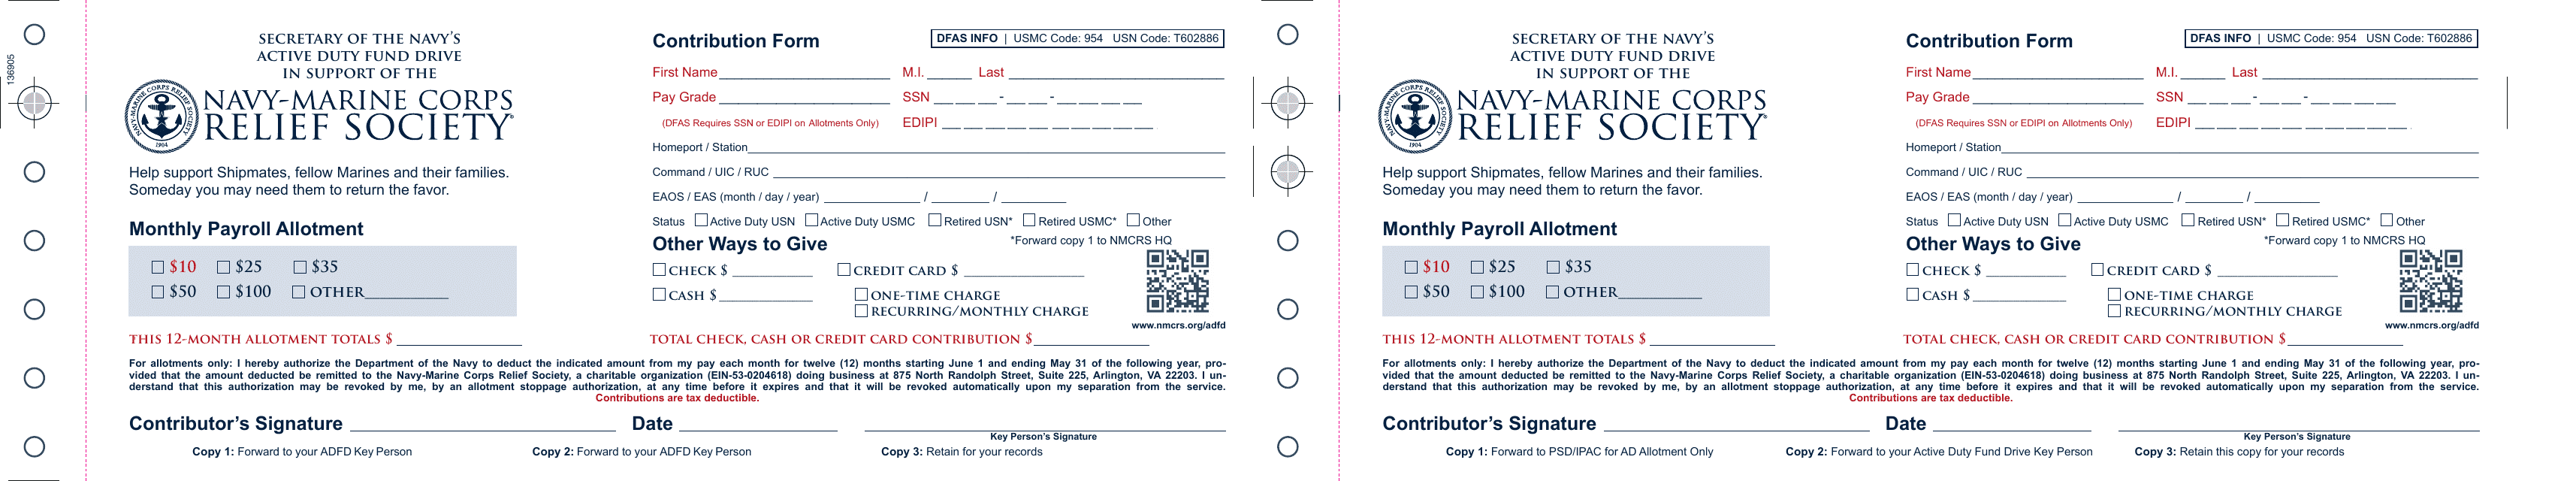 Contribution Form - the Secretary of the Navy's Active Duty Fund Drive in Support of the Navy-Marine Corps Relief Society